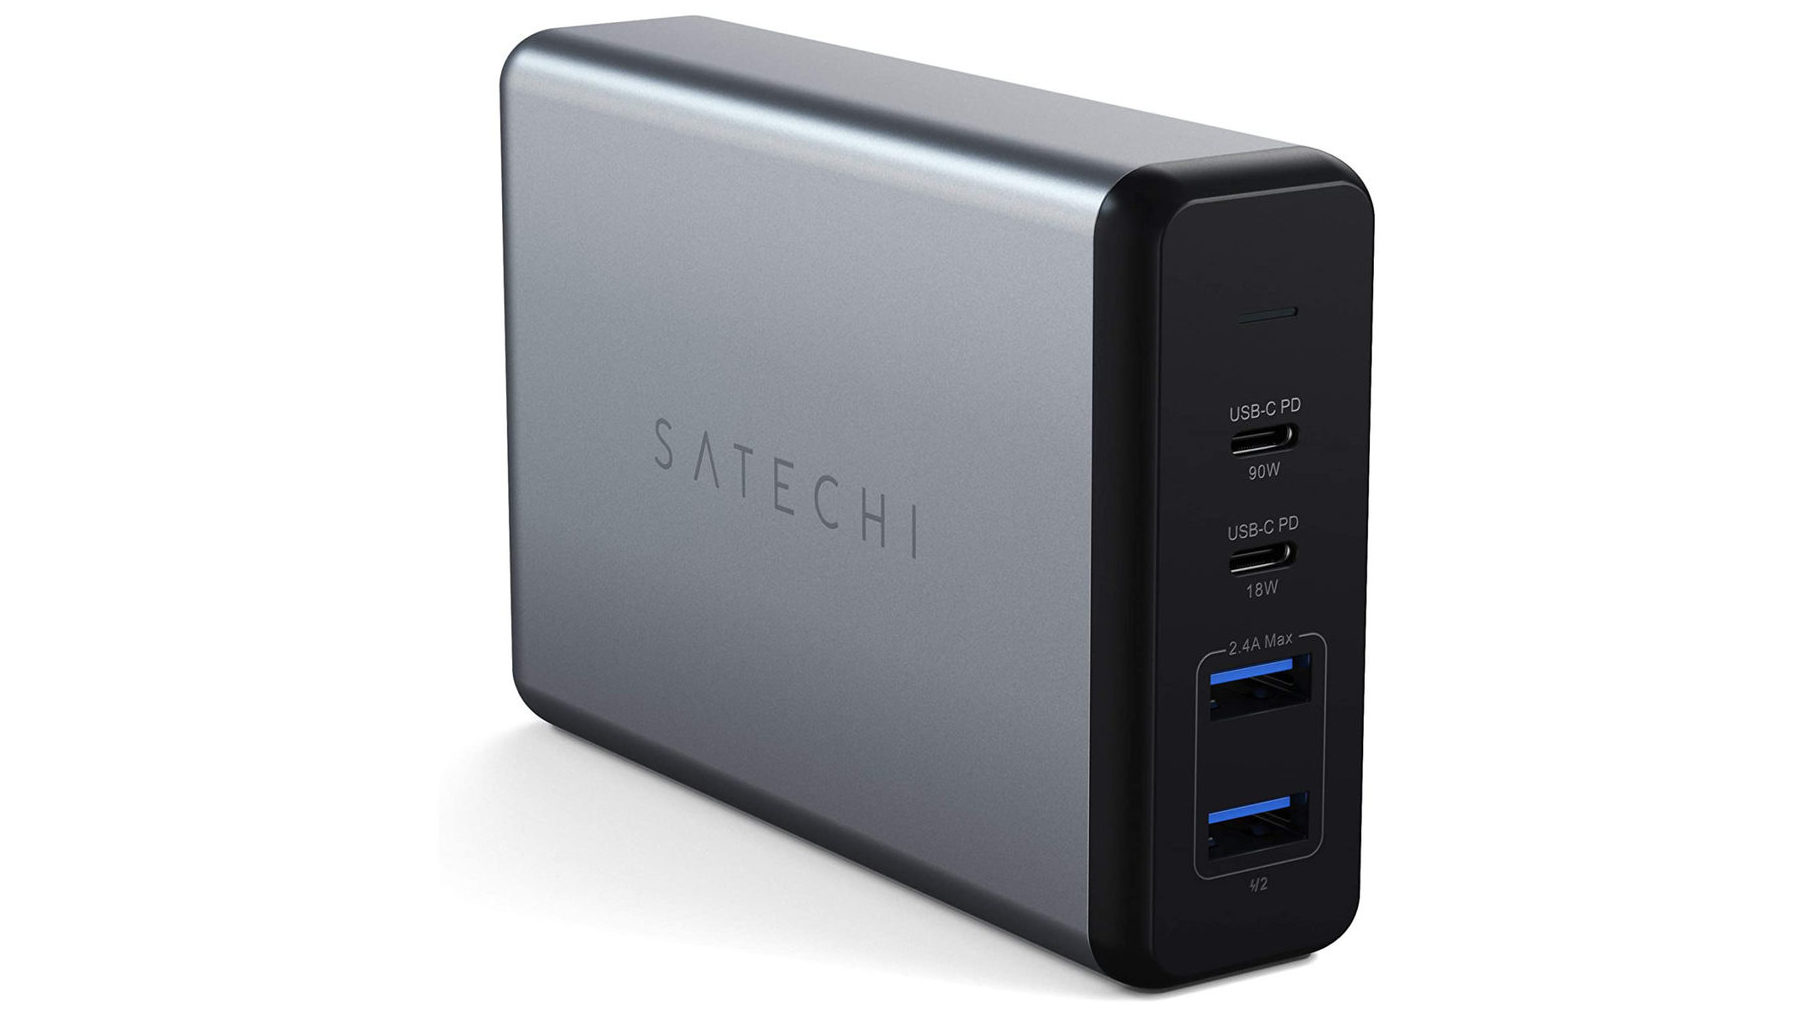 Satechi 108W Pro charger - The best USB wall chargers